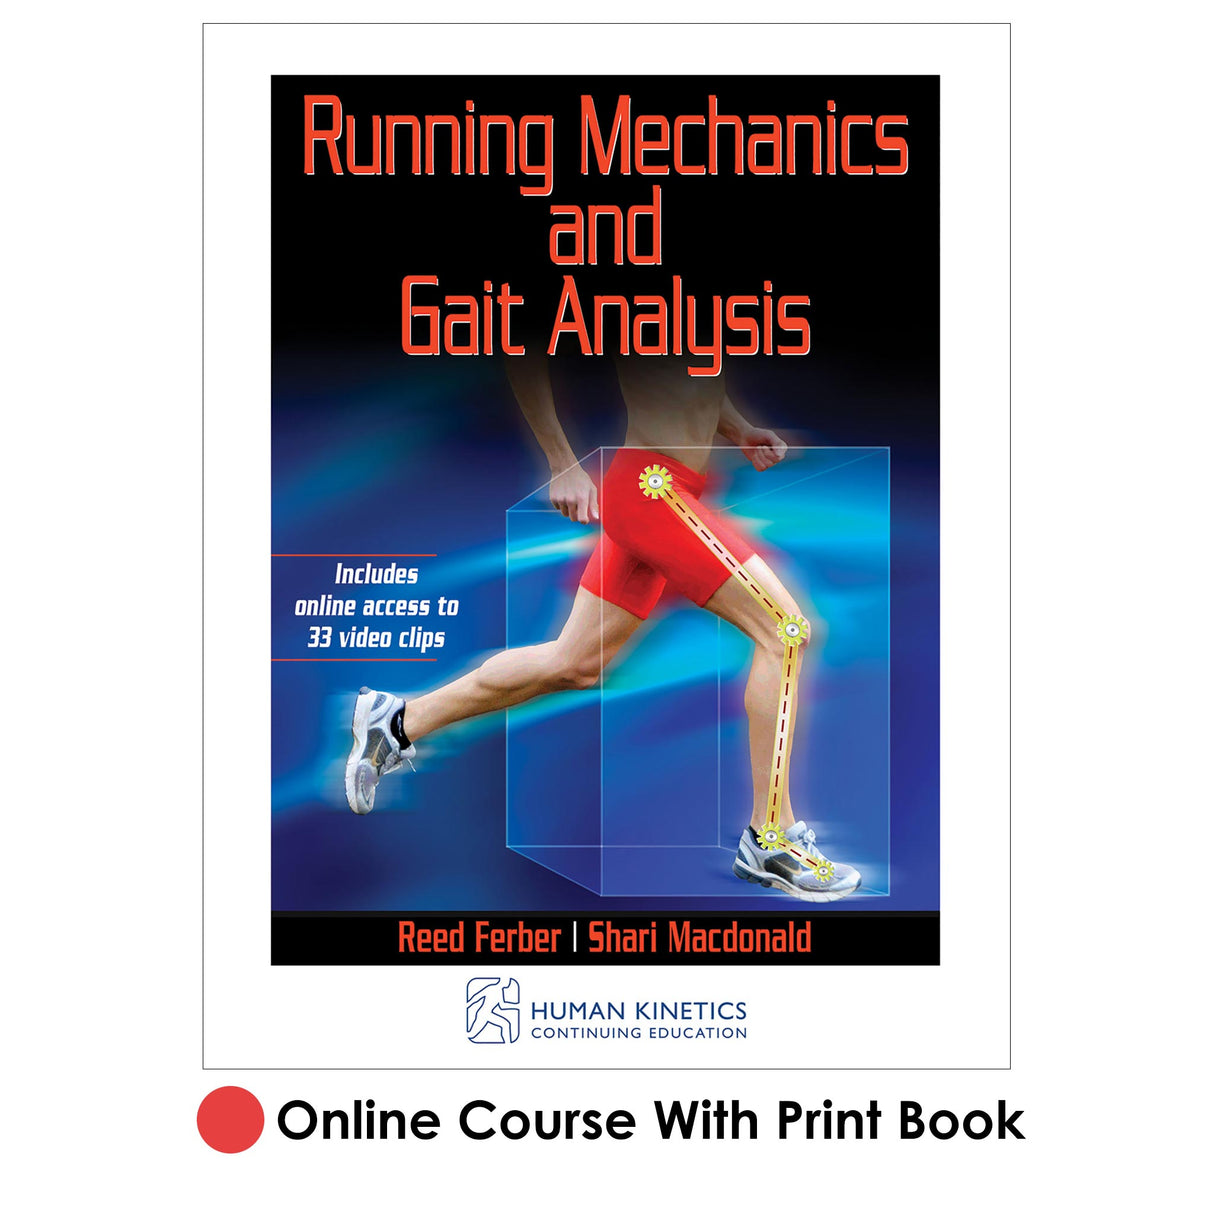 Running Mechanics and Gait Analysis Online CE Course With Print Book